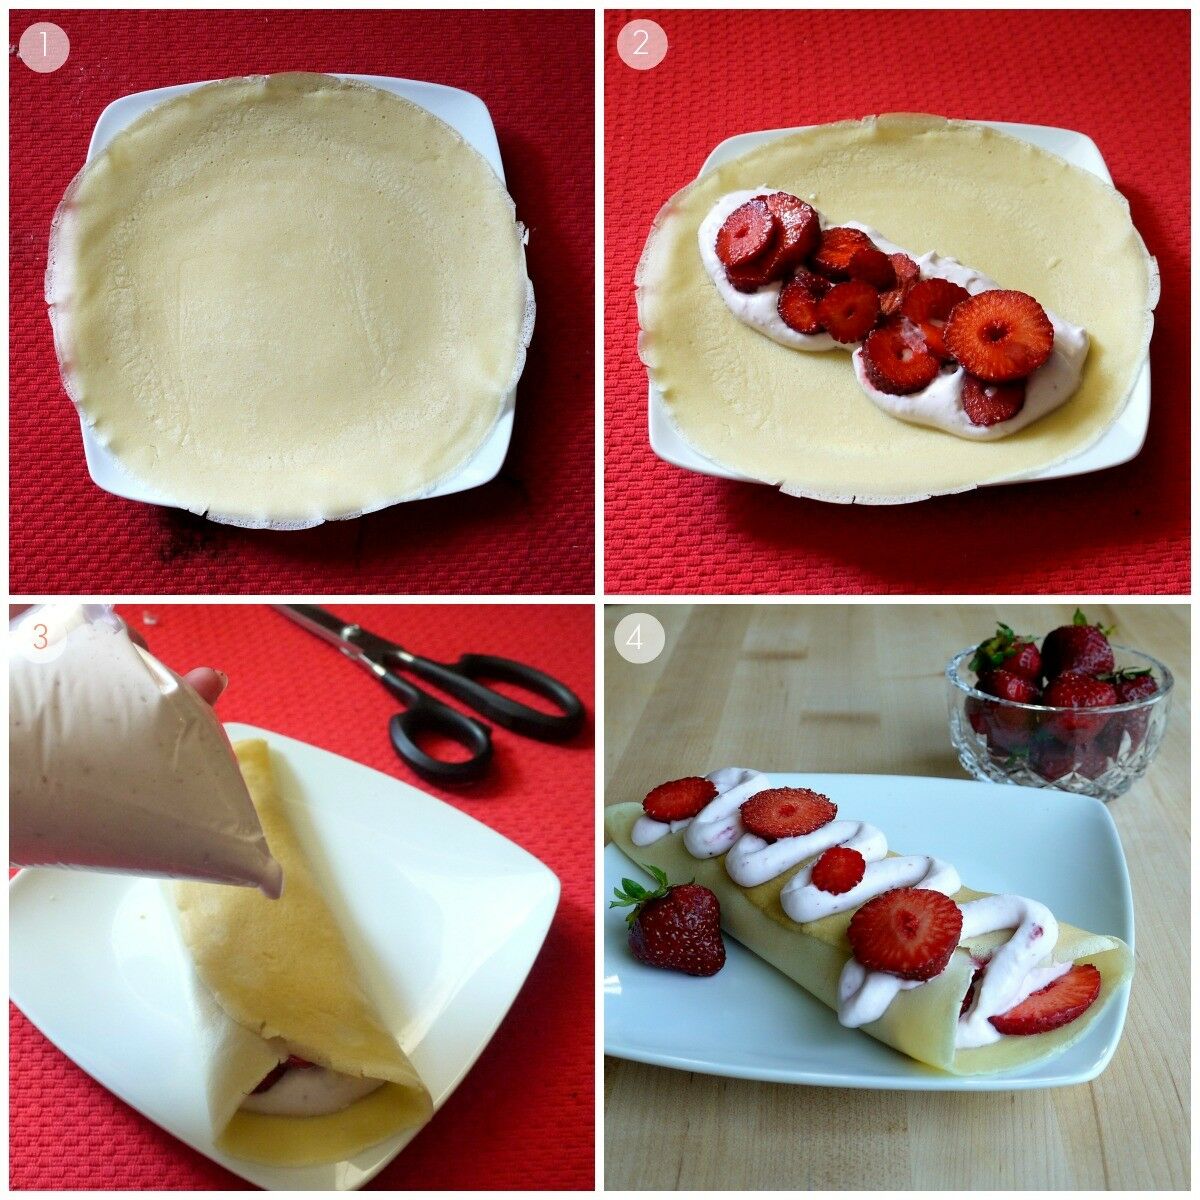 4-panel collage illustrating how to roll a crepe. Flat, fill, roll, garnish.